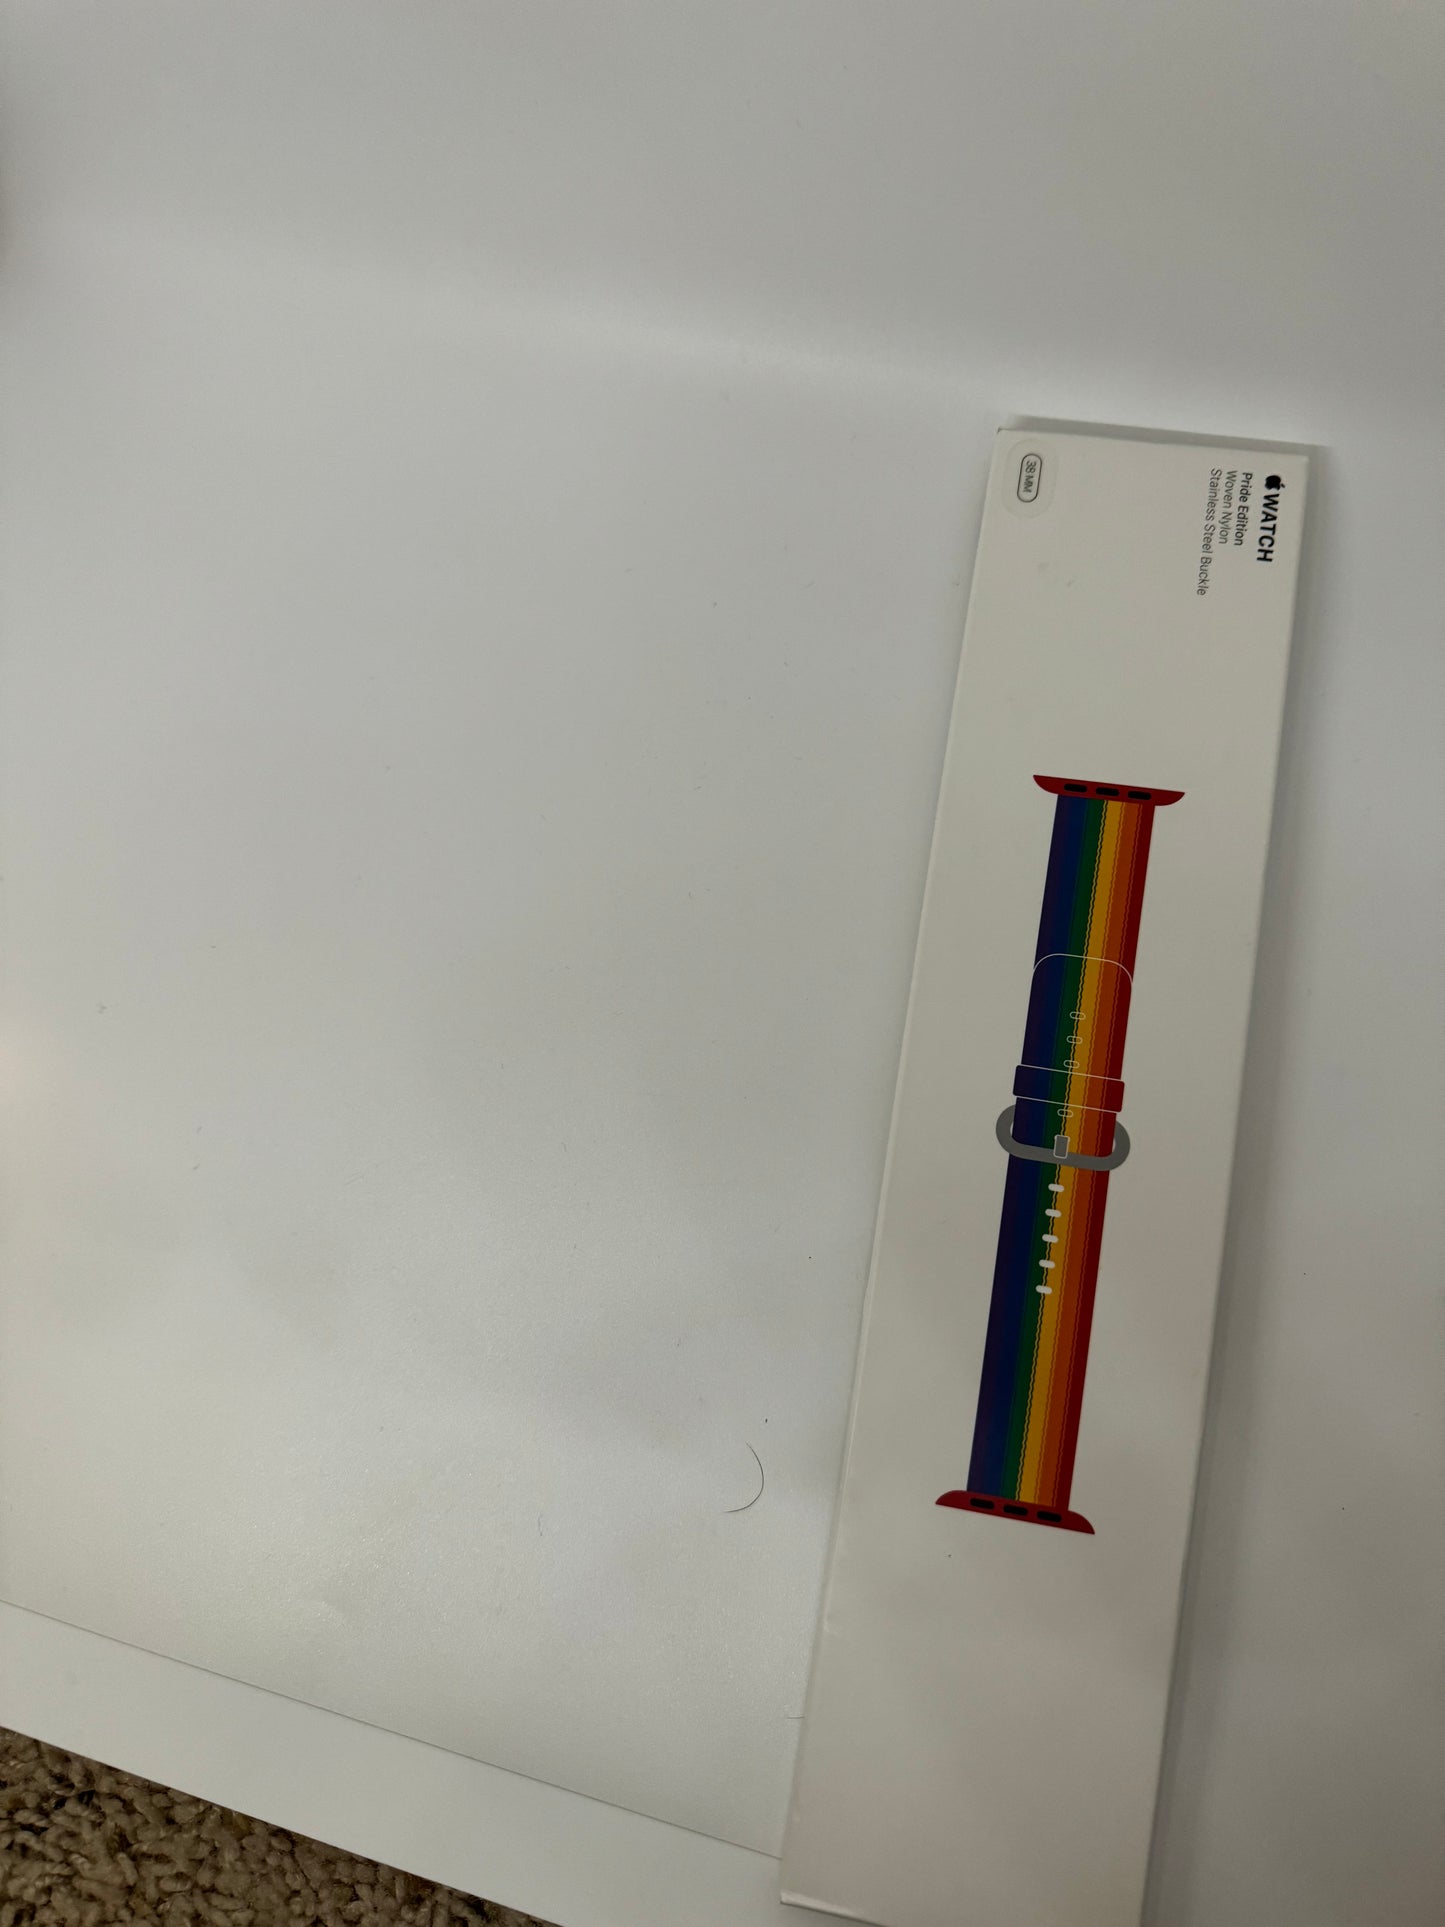 The picture shows a white rectangular box placed on a white surface. The box is positioned vertically and is partially visible on the right side of the image. On the box, there is an image of a watch band that has a rainbow color scheme. The colors on the band are arranged in vertical stripes and include red, orange, yellow, green, blue, and purple. Above the image of the watch band, there is some text which is not fully visible, but the word "WATCH" can be seen. The background is plain white and 